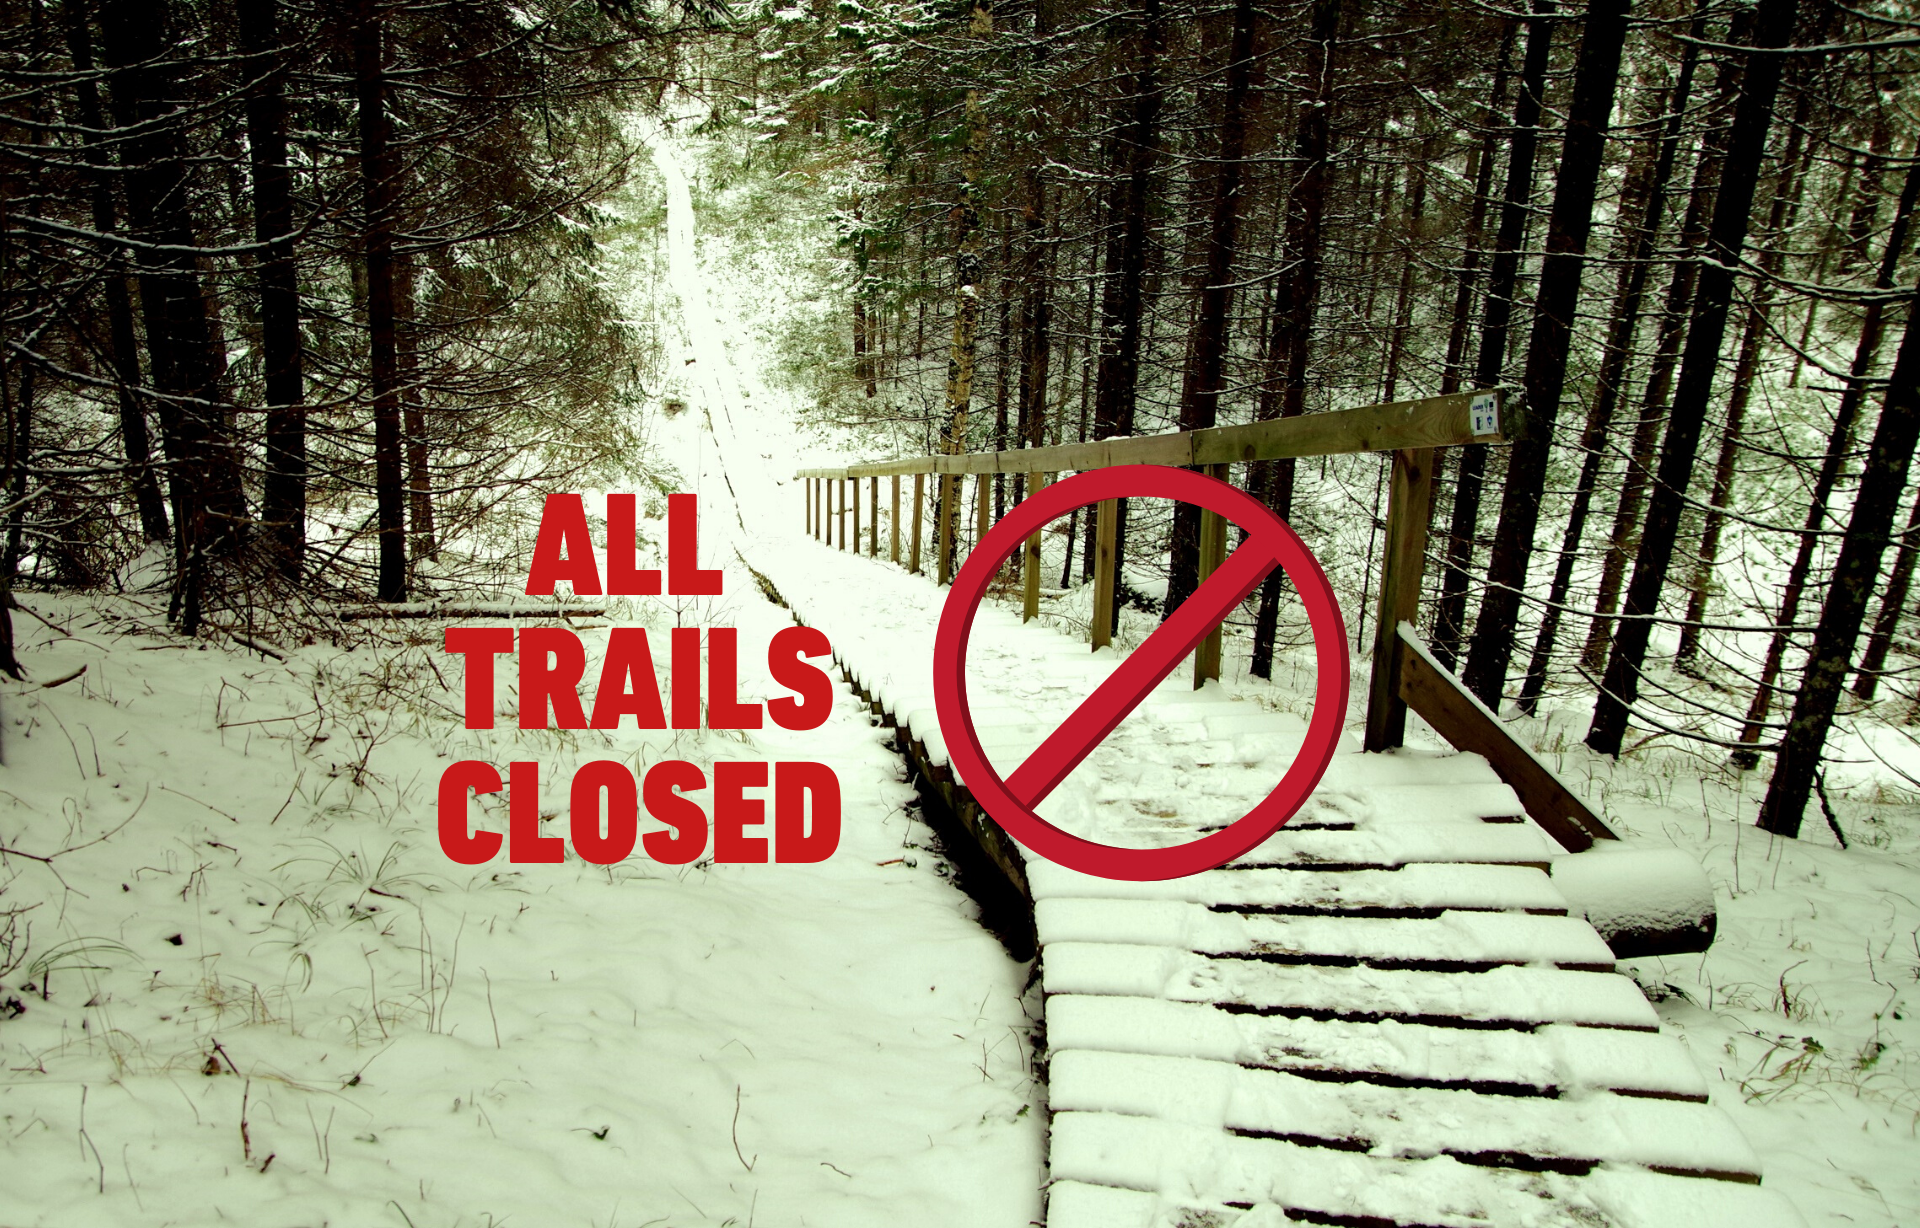 a picture of the boardwalk in the woods in winter with snow. It has the red text, "ALL TRAILS CLOSED" with a circle with a line through it on the boardwalk.